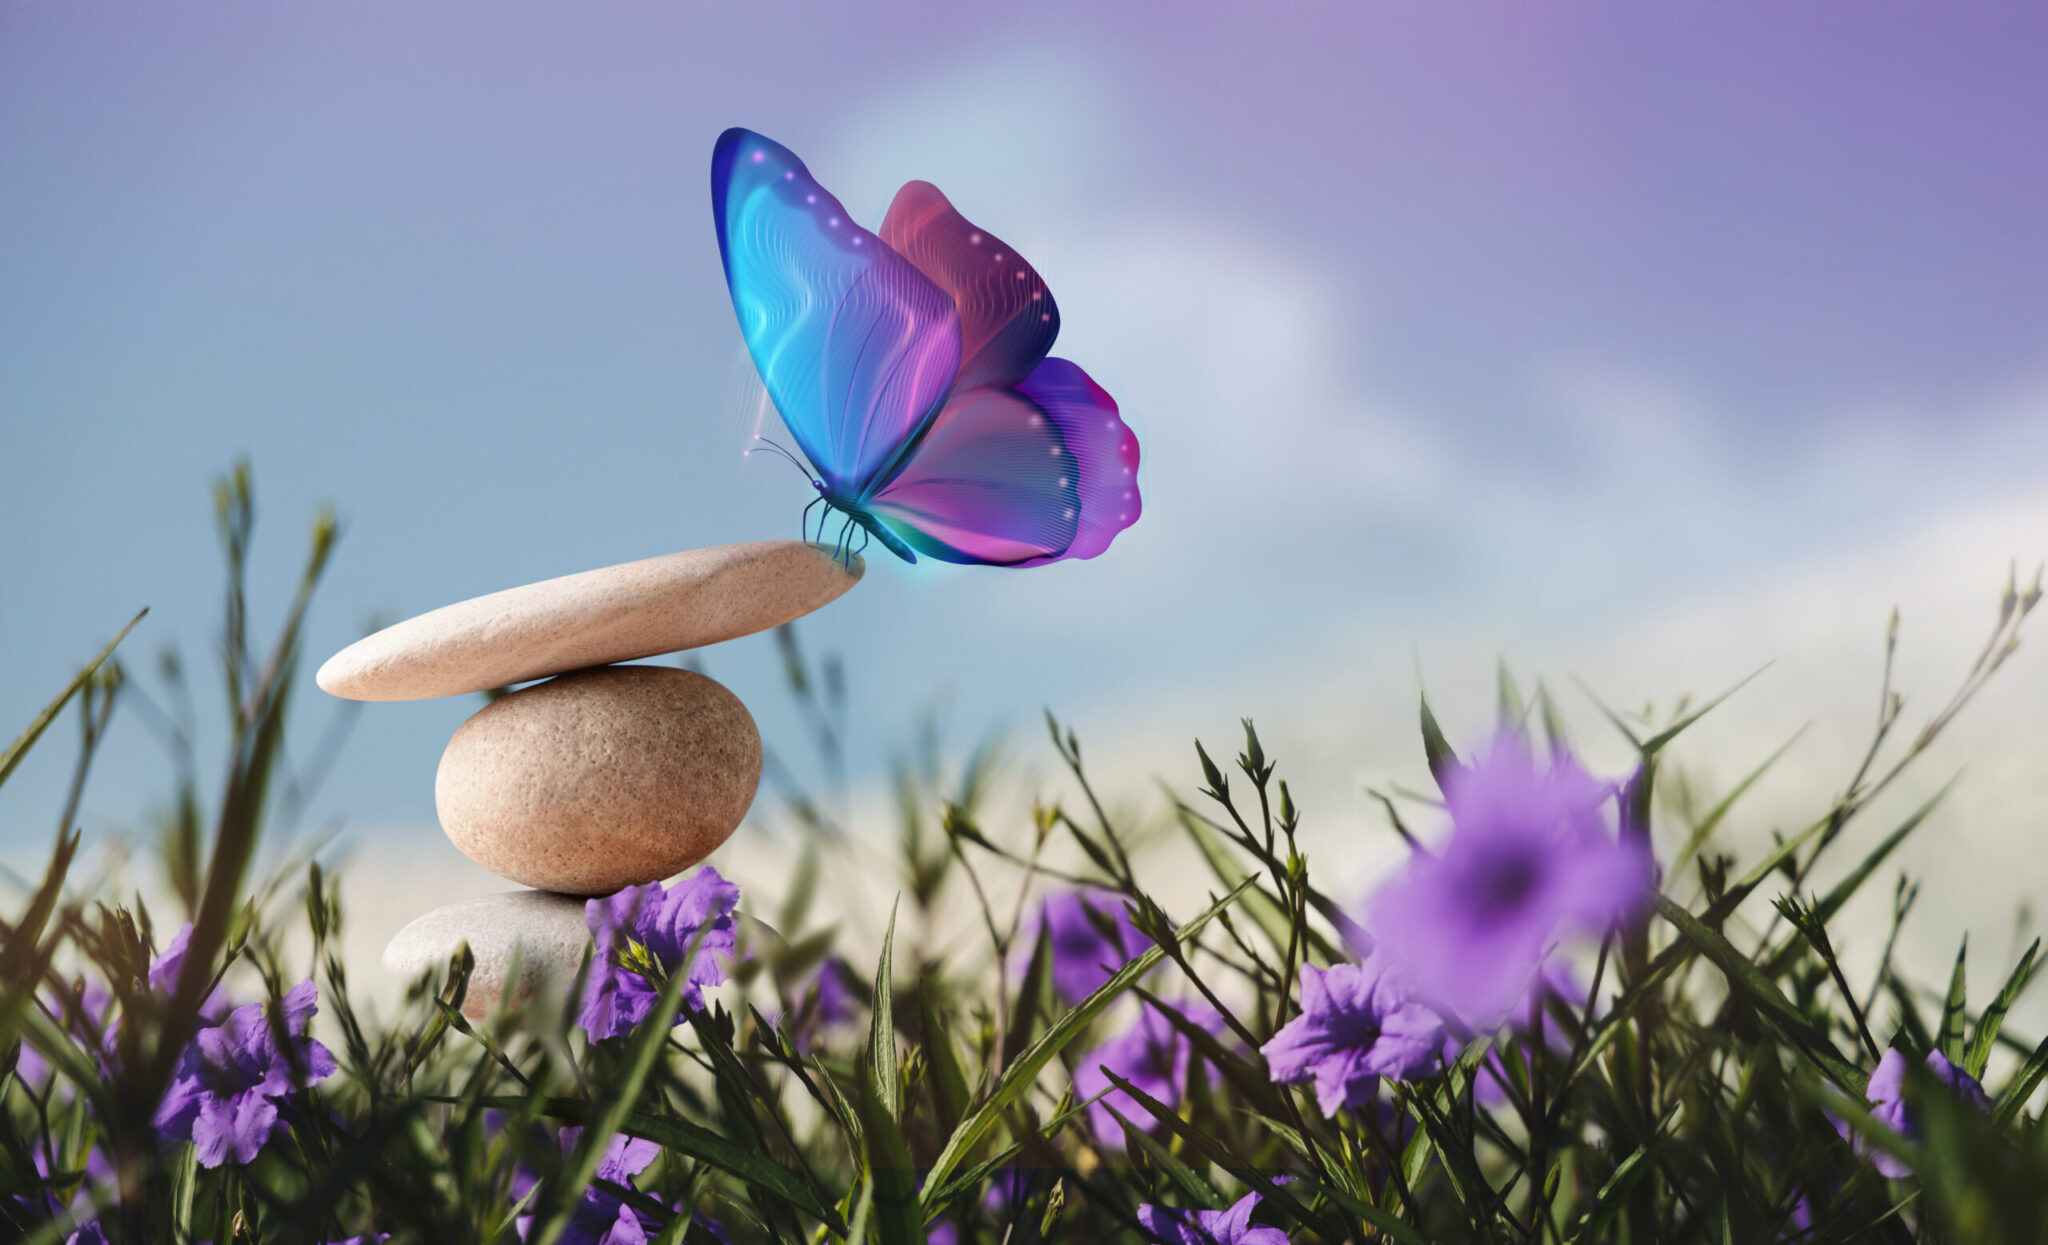 Surrealist Butterfly on the Pebble